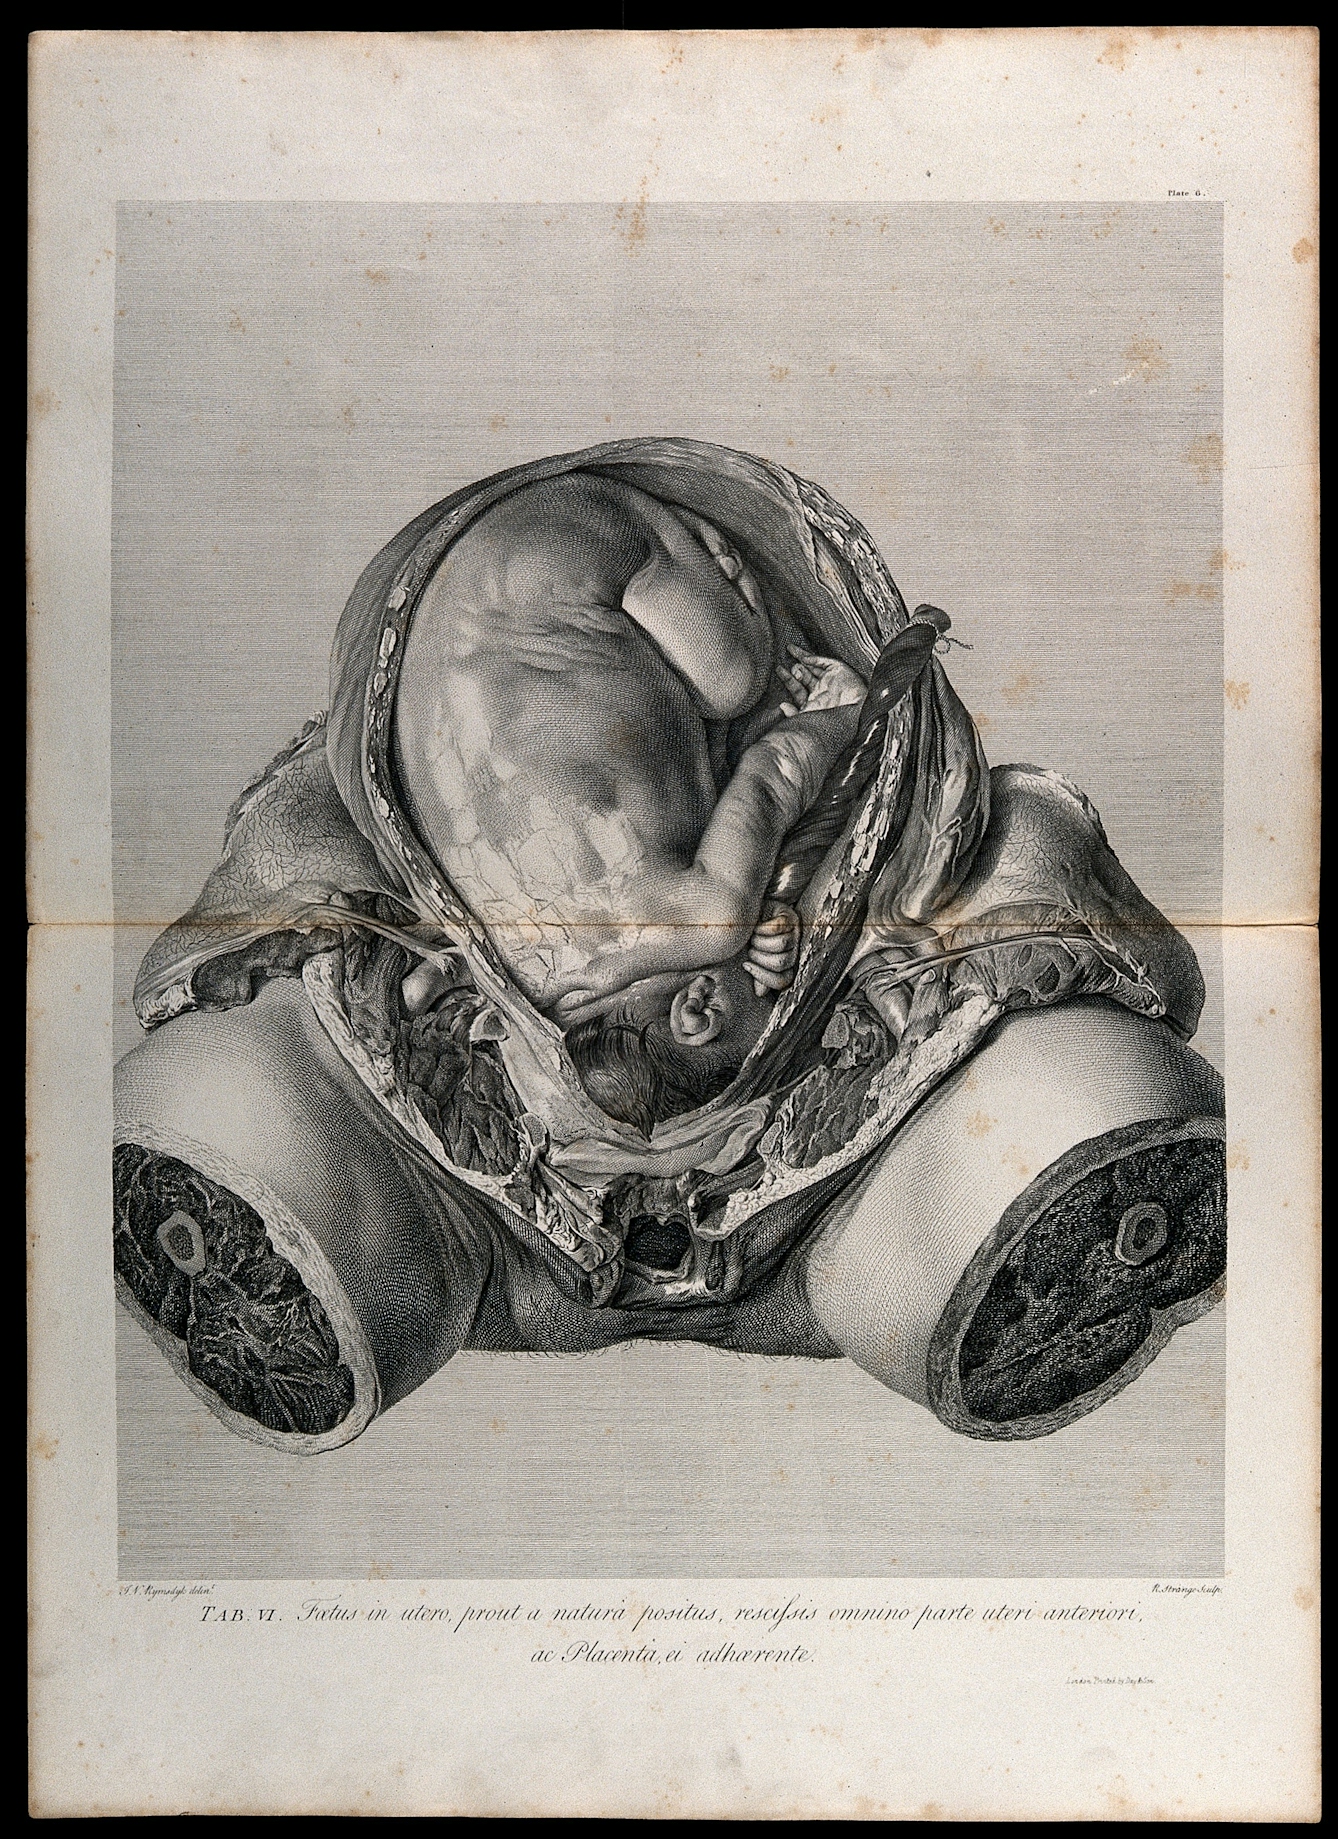 Dissection of the pregnant uterus, showing the foetus at nine months. Copperplate engraving by R. Strange after I.V. Rymsdyk, 1774, reprinted 1851.